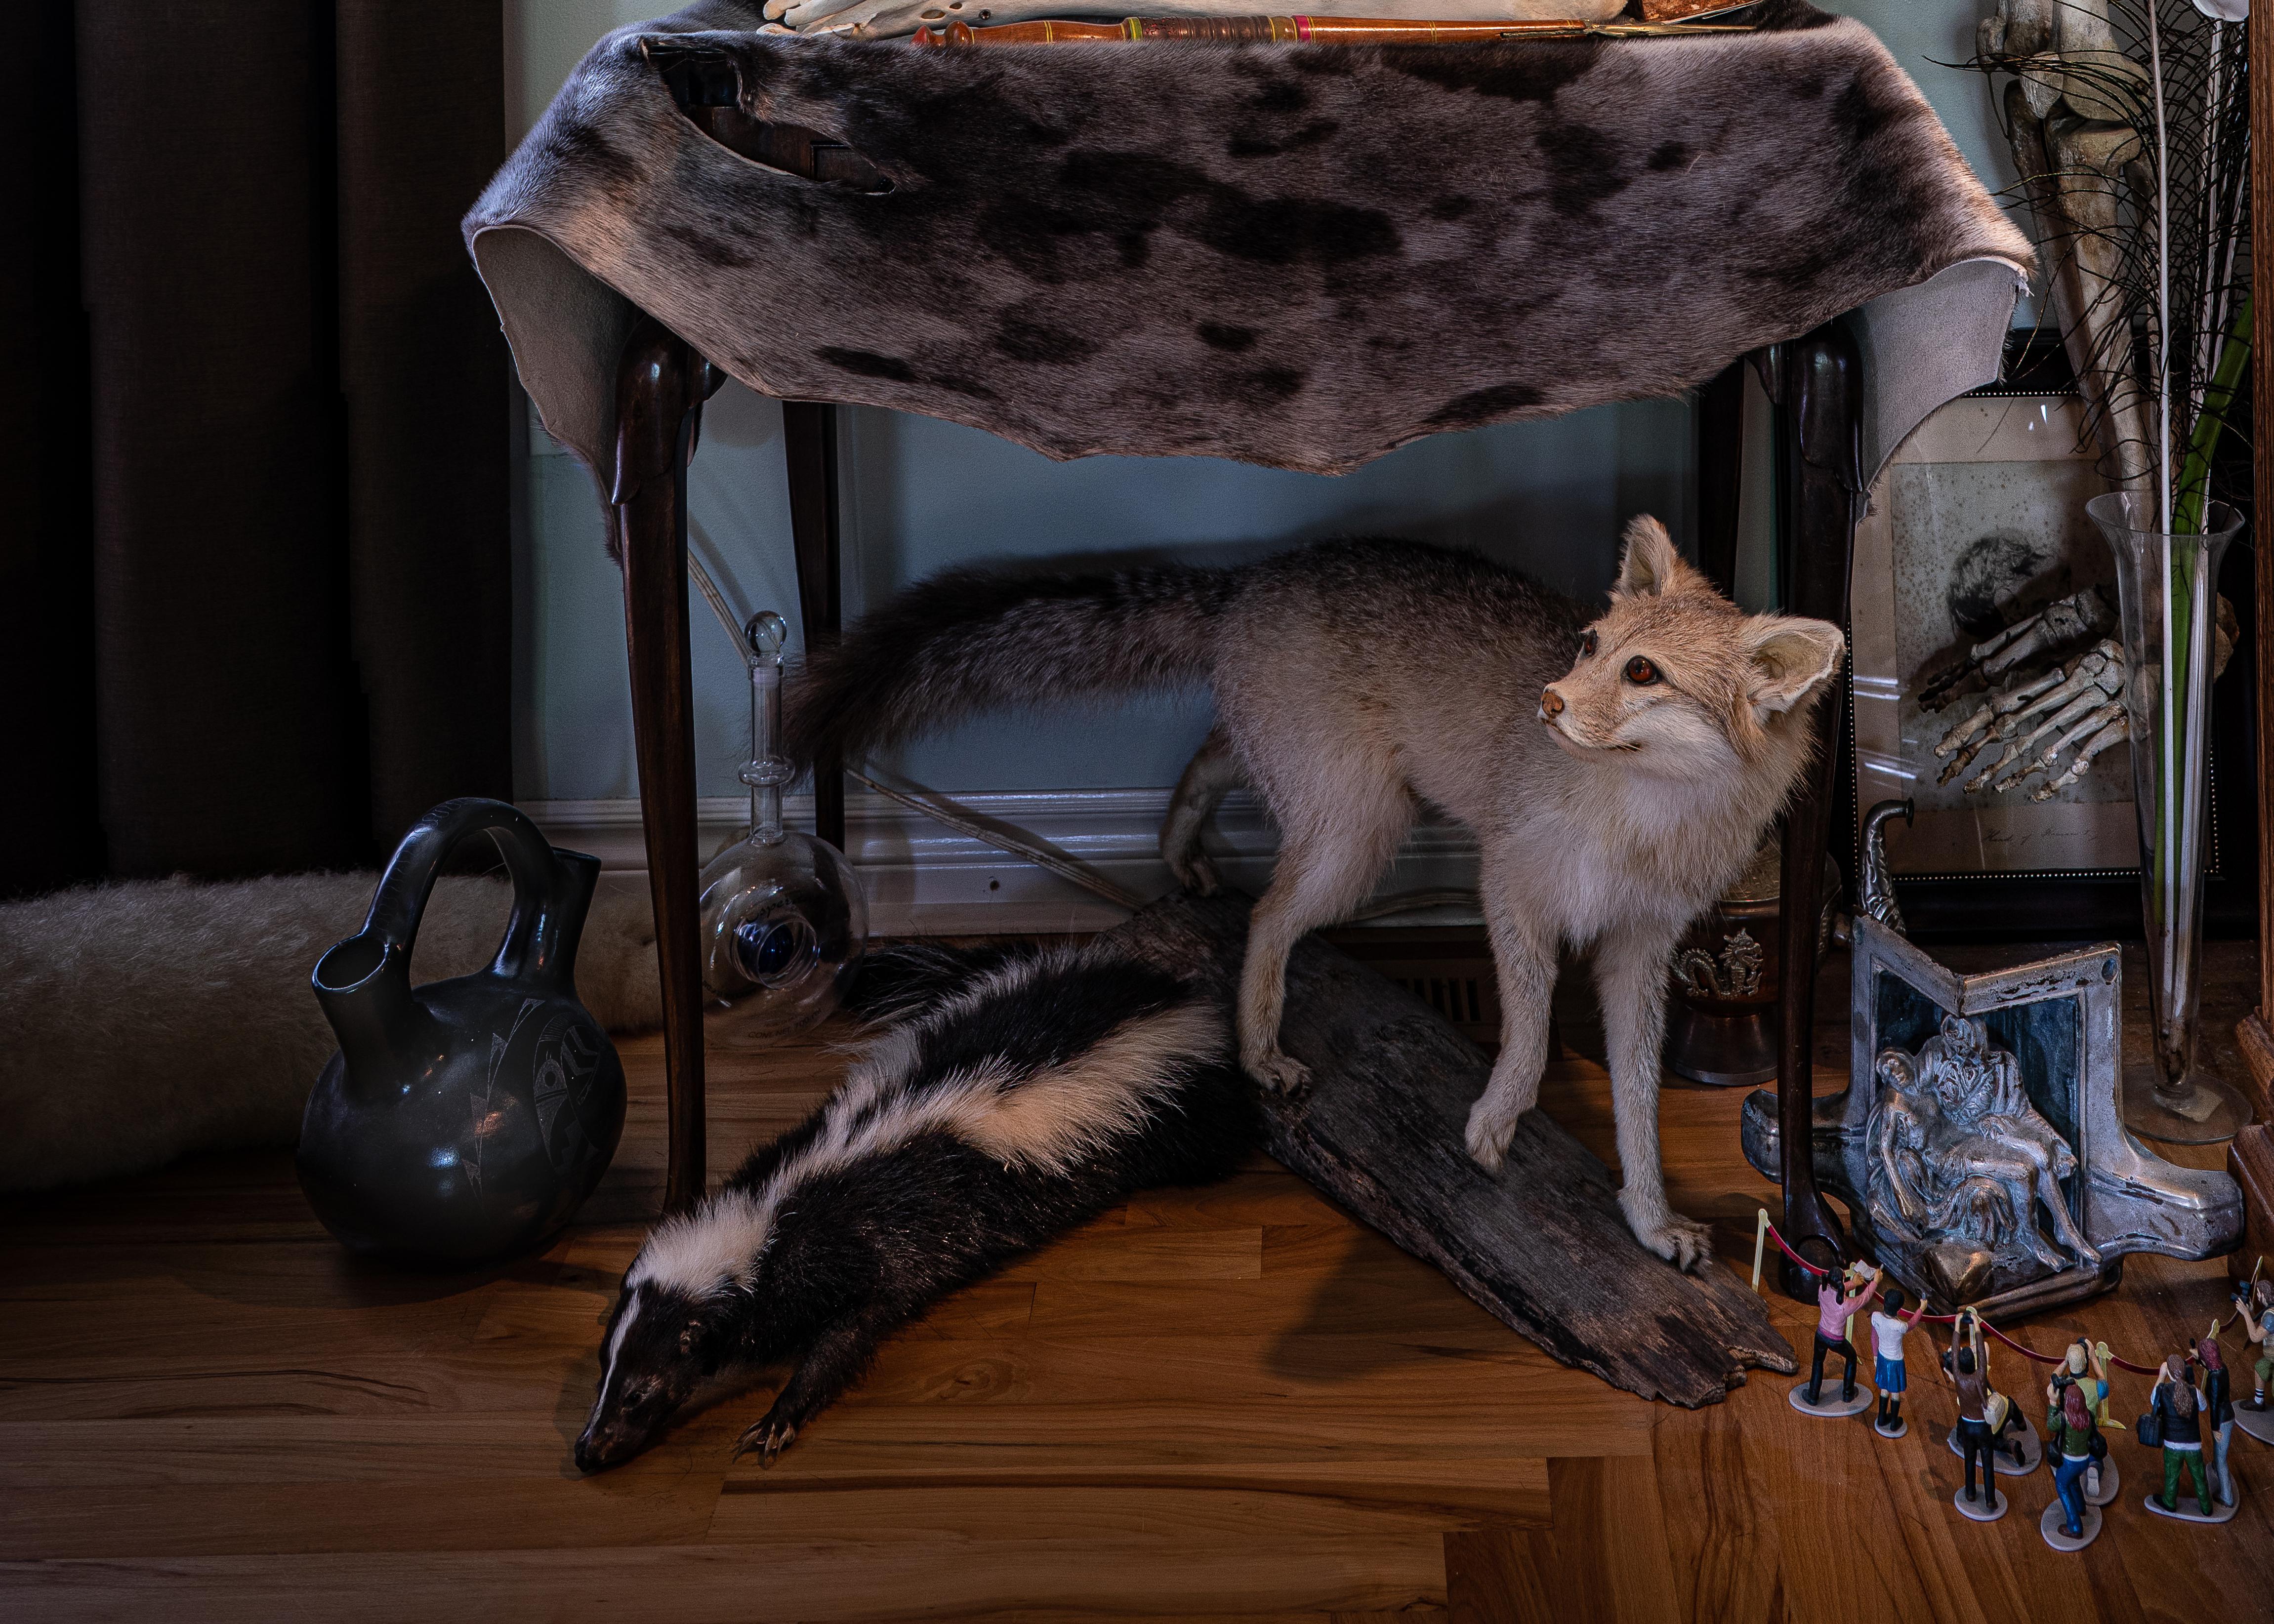 A good friend of the artist’s fascinating and prized collection--human and animal bones, taxidermy, ostrich feathers and a child’s figurines strike an intimate and curious portrait.
Shani Mootoo’s photos are not curated. The collected objects reveal